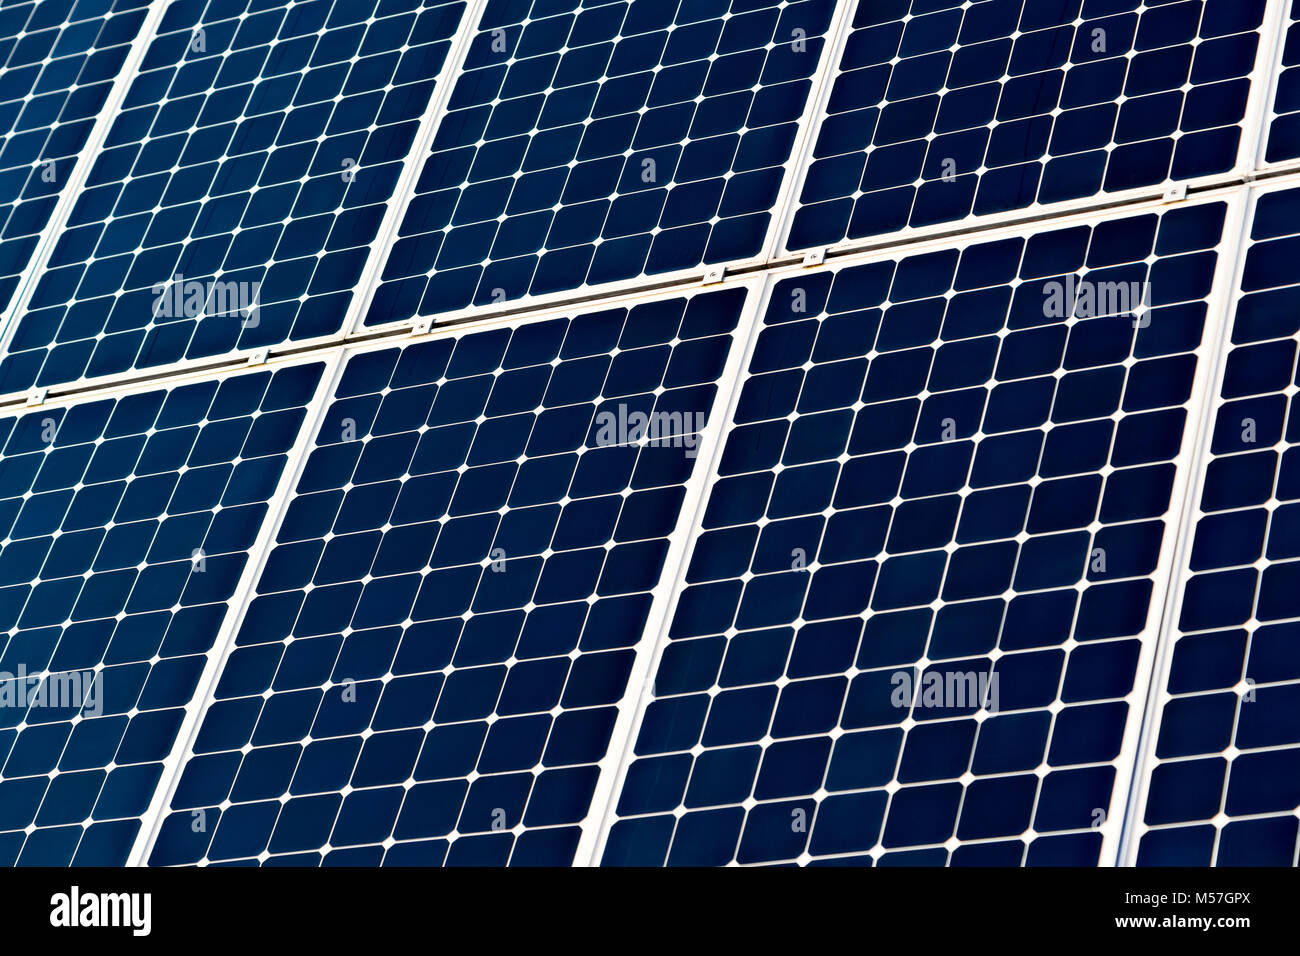 Solar power photovoltaic panel or battery of dark blue cells to generate electical energy. Ecologically clean generator, renewable source of energy Stock Photo